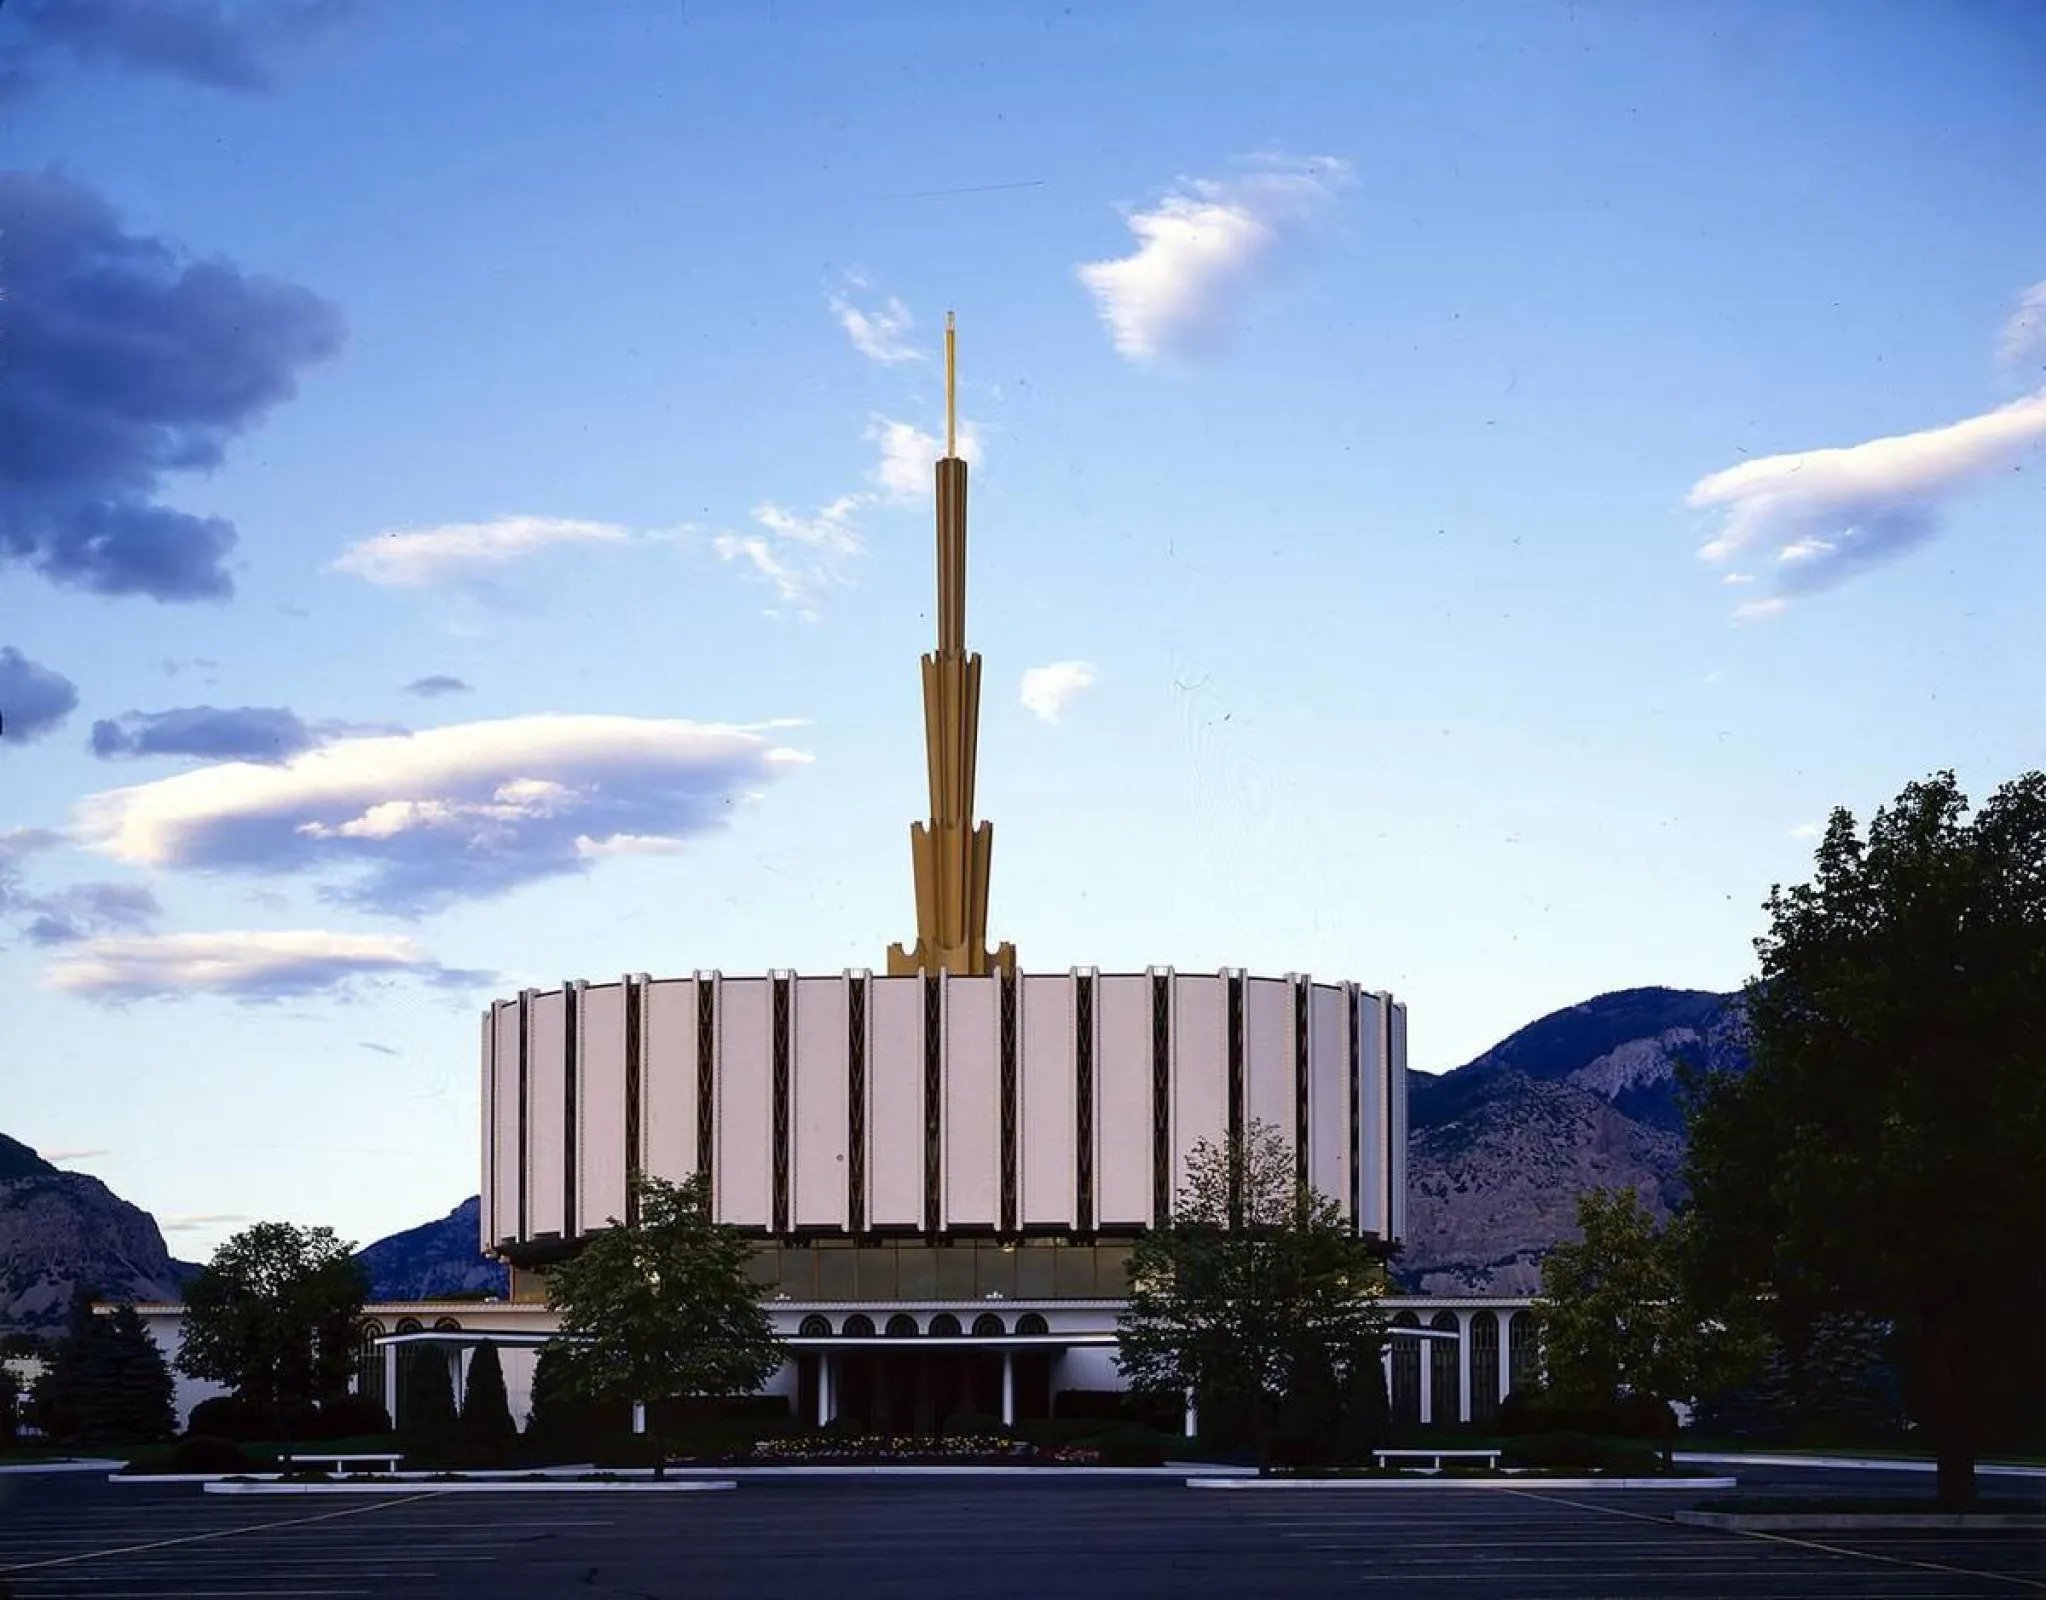 A sunset view of the original Ogden Utah Temple, dedicated in 1972, that had a flat, round base with a spire in the center.